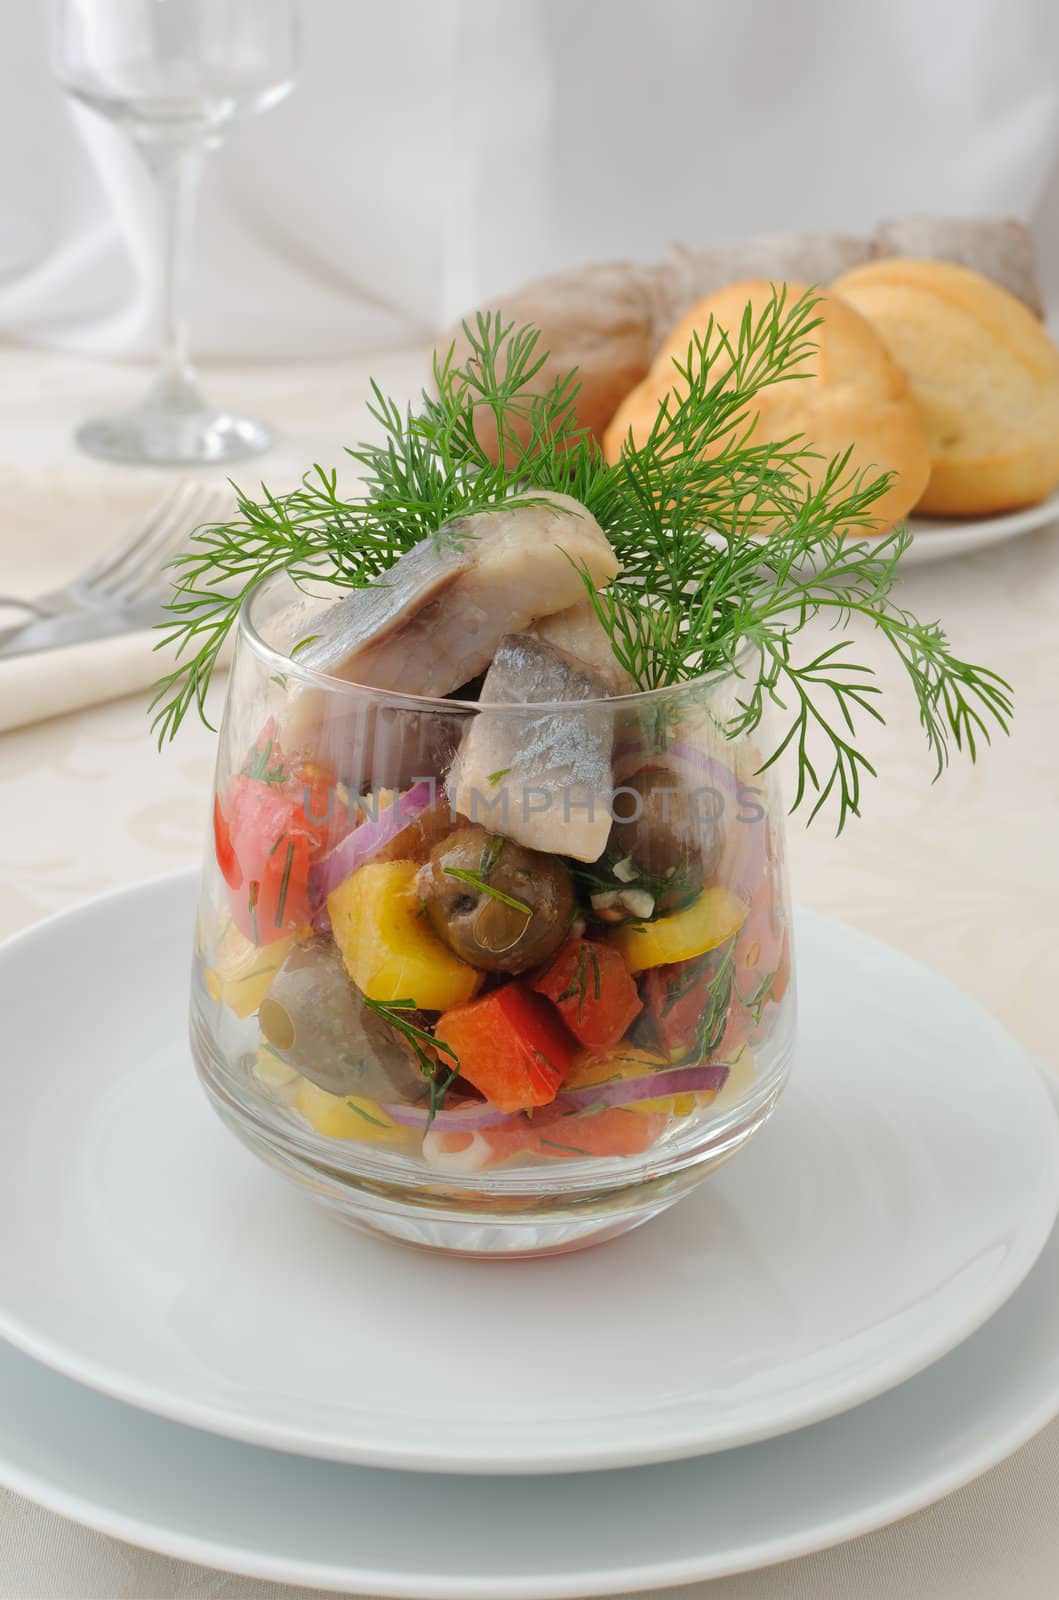 Salad with pieces of herring, white bread with vegetables and herbs